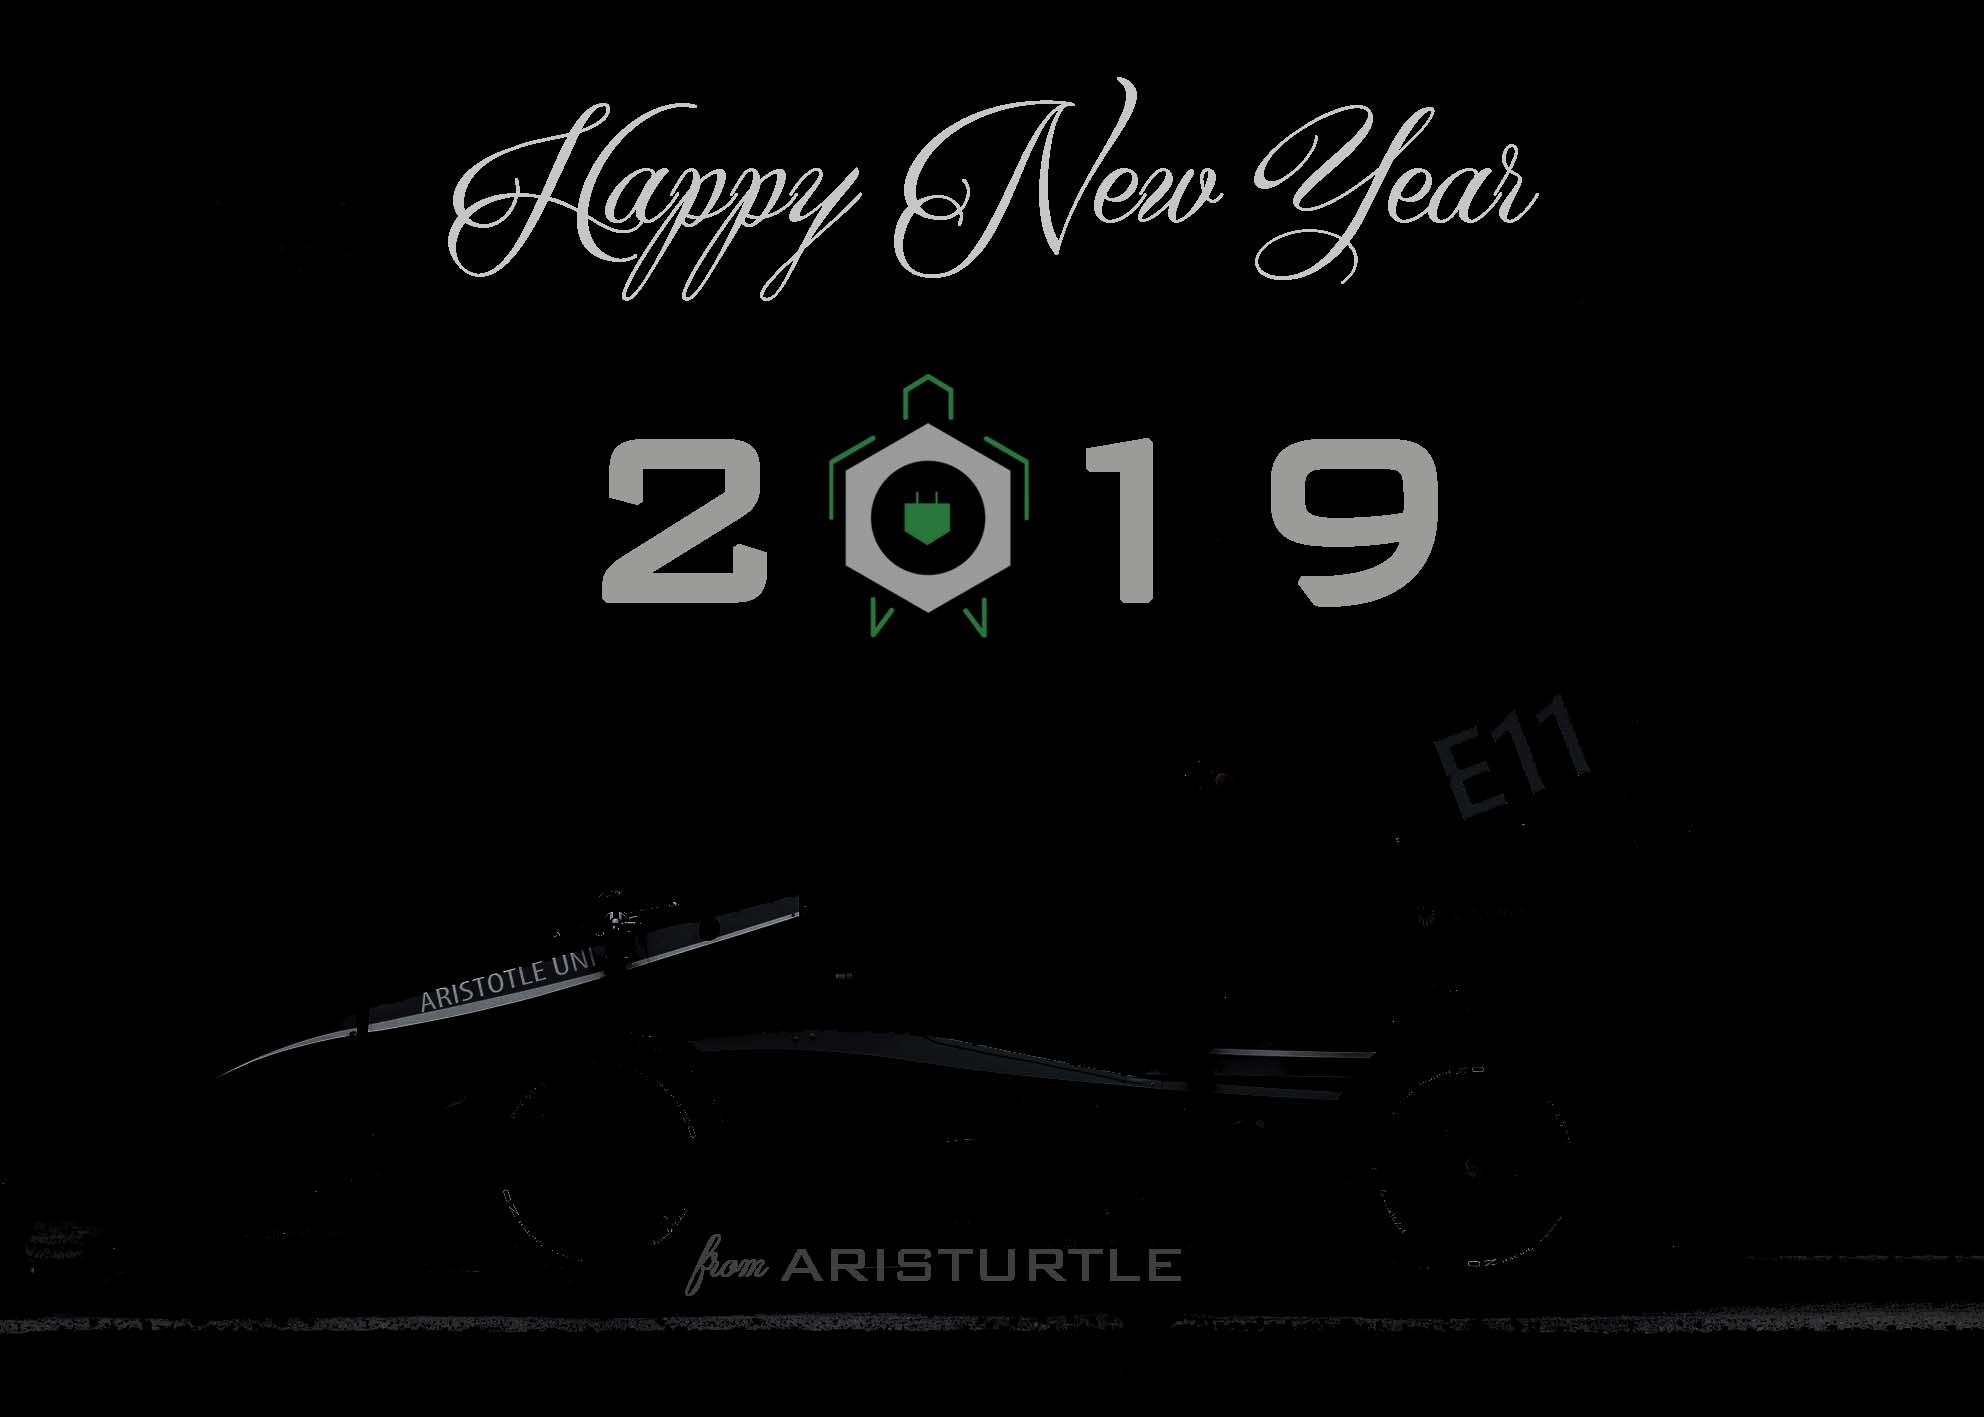 Aristurtle wishes you a Happy New Year!